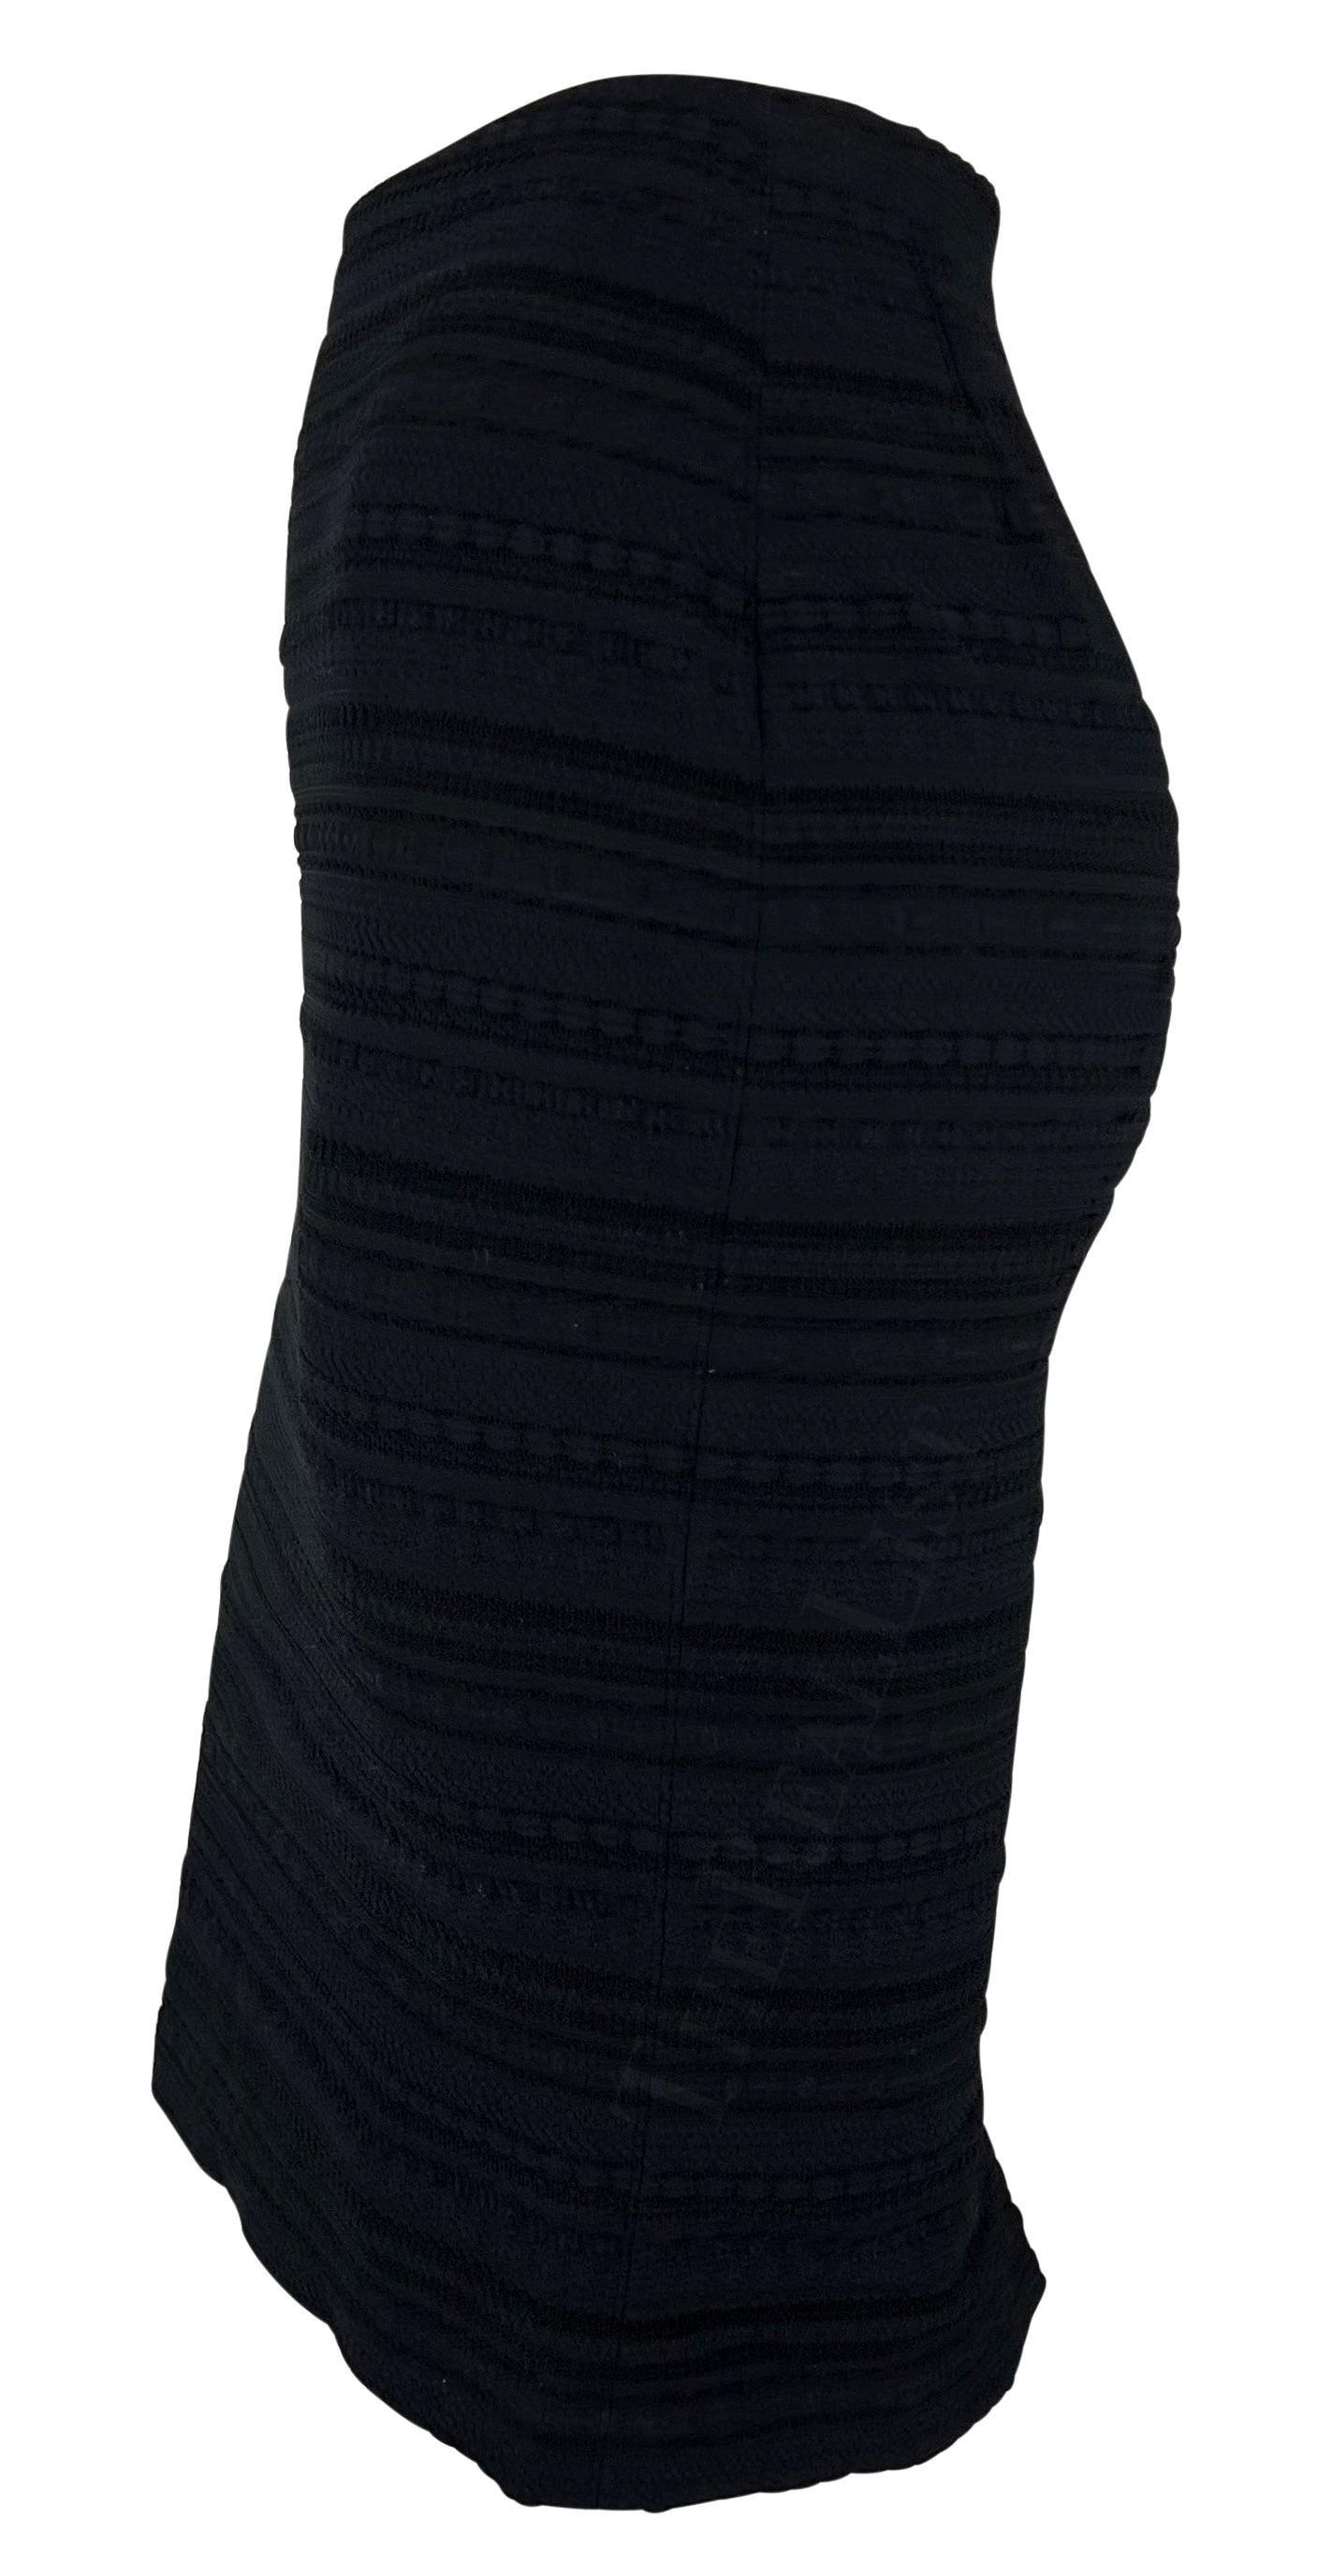 Late 1990s Dolce & Gabbana Black Textured Knit Woven Bodycon Pencil Skirt In Excellent Condition For Sale In West Hollywood, CA